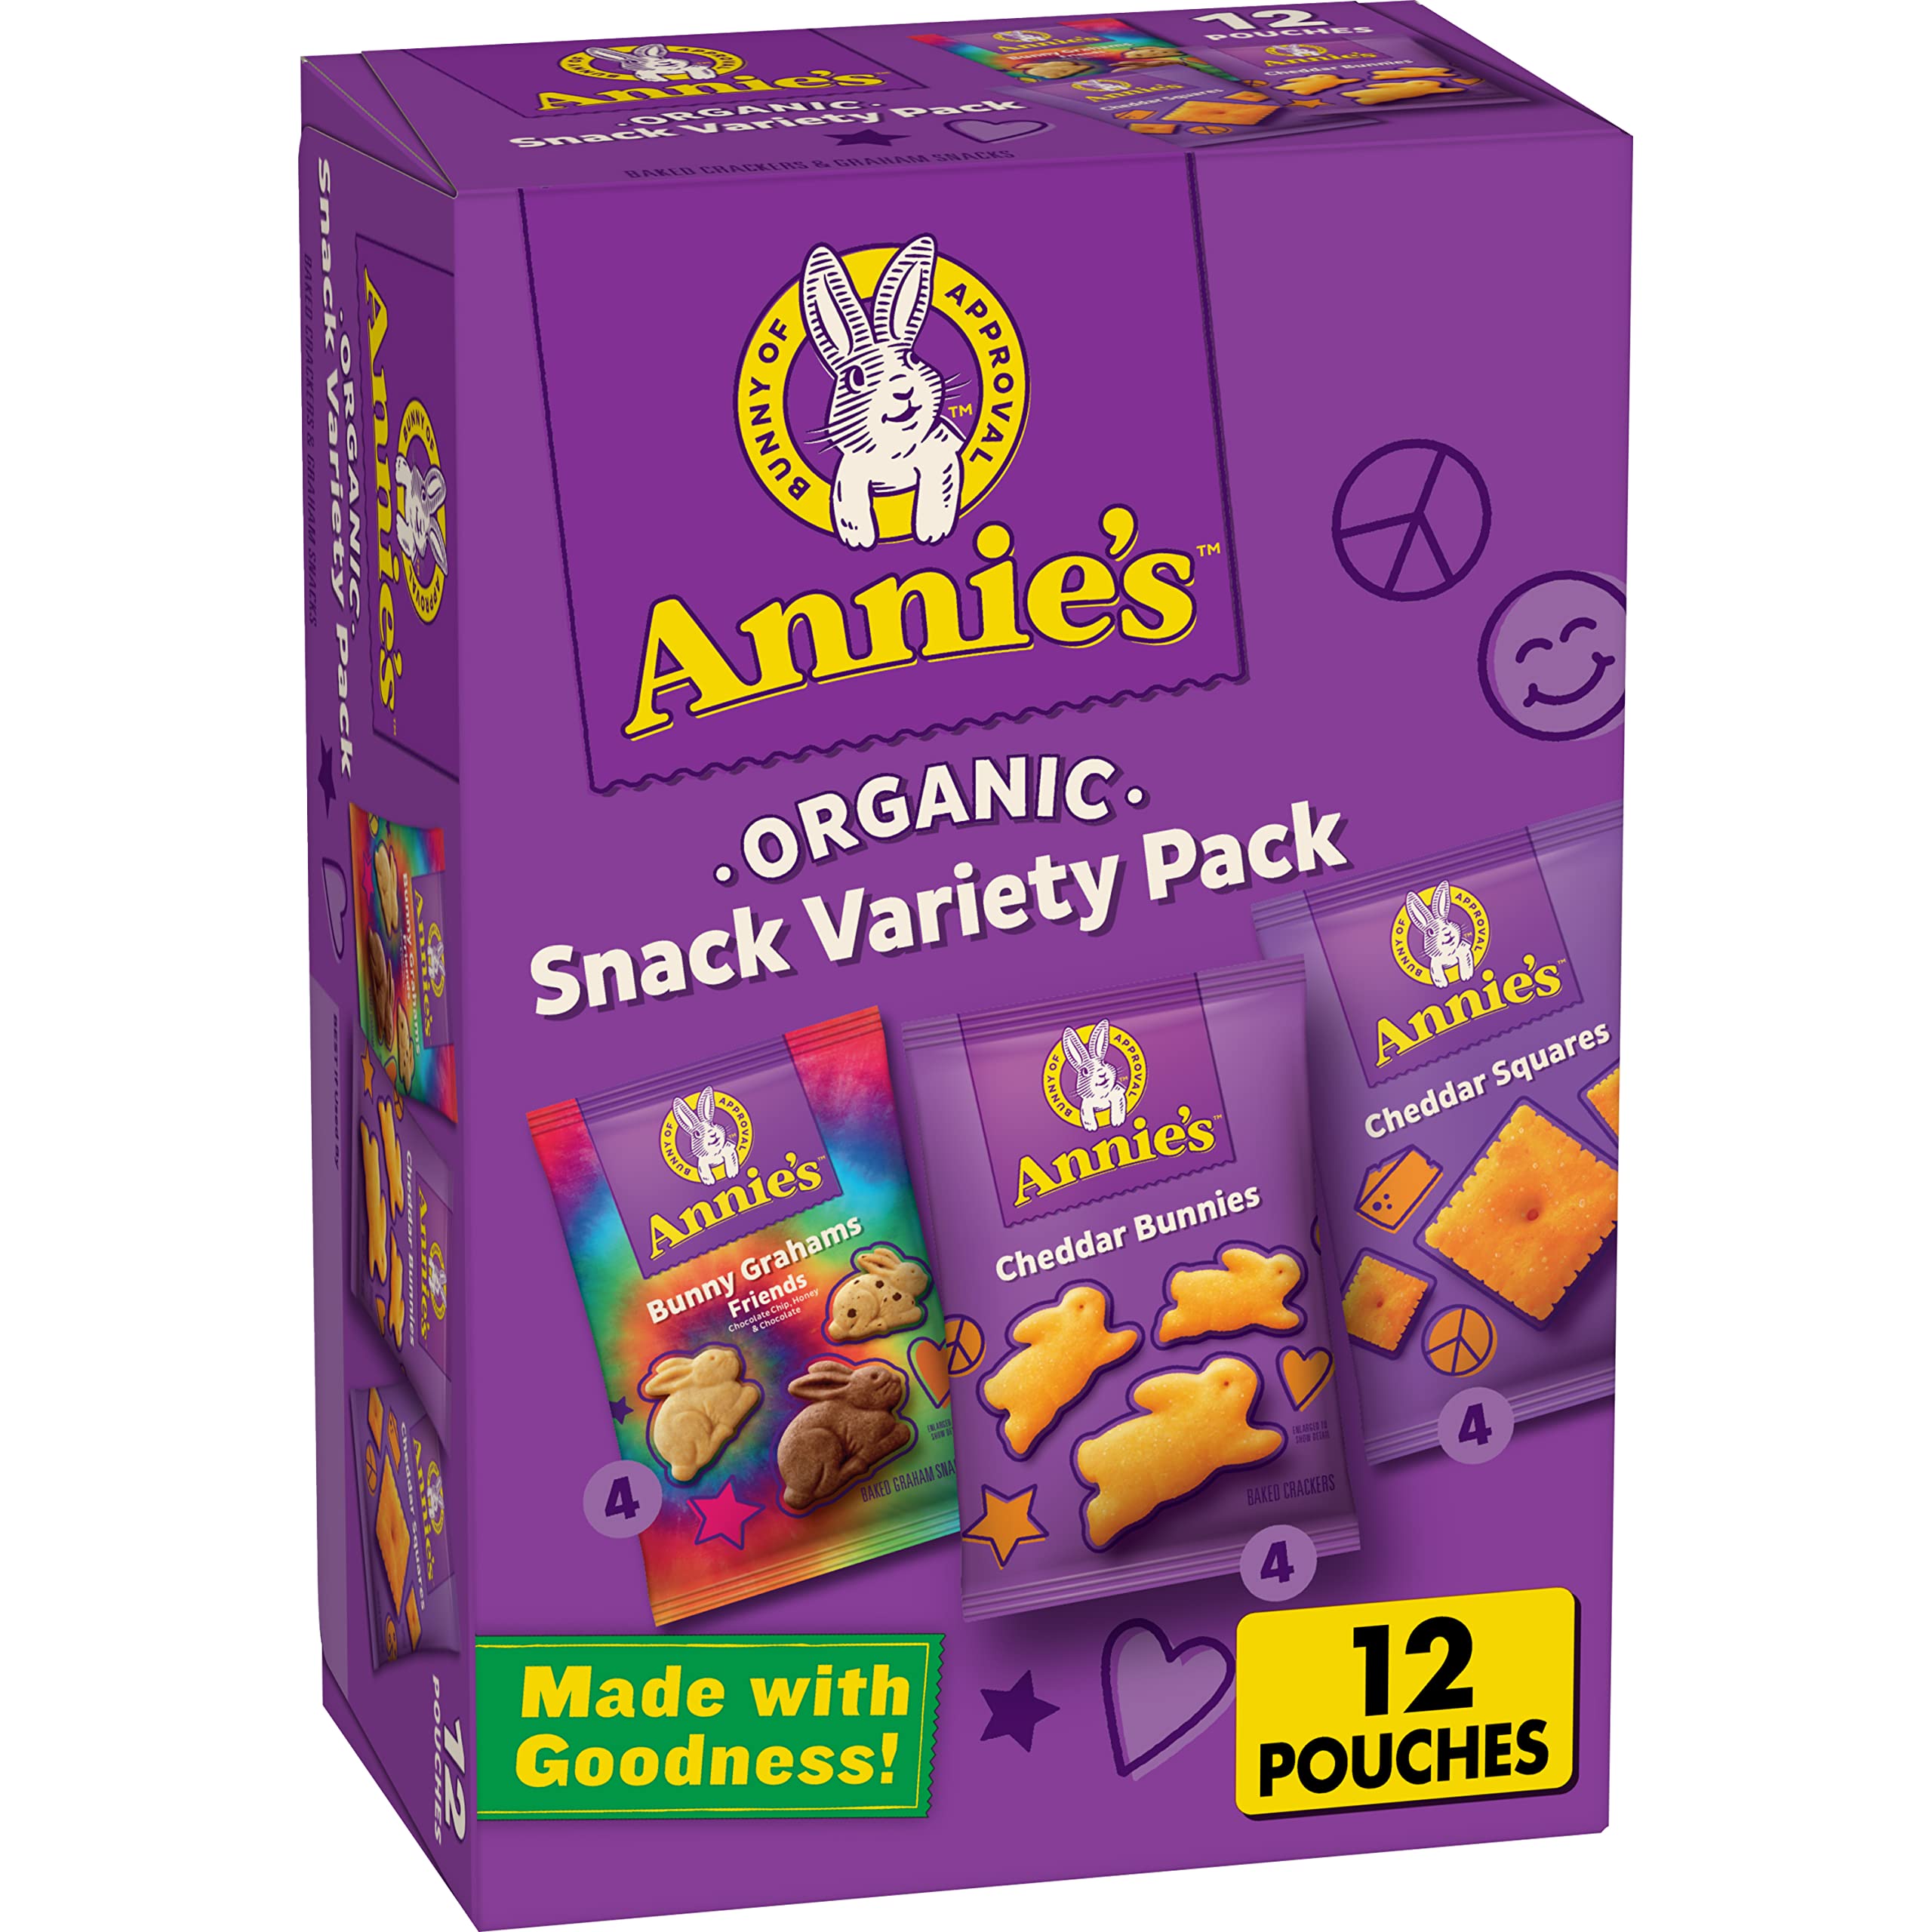 12-Count Annie's Organic Snack Variety Pack (Cheddar Bunnies, Bunny Grahams & Cheddar Squares) $4.93 w/ S&S + Free Shipping w/ Prime or on $35+